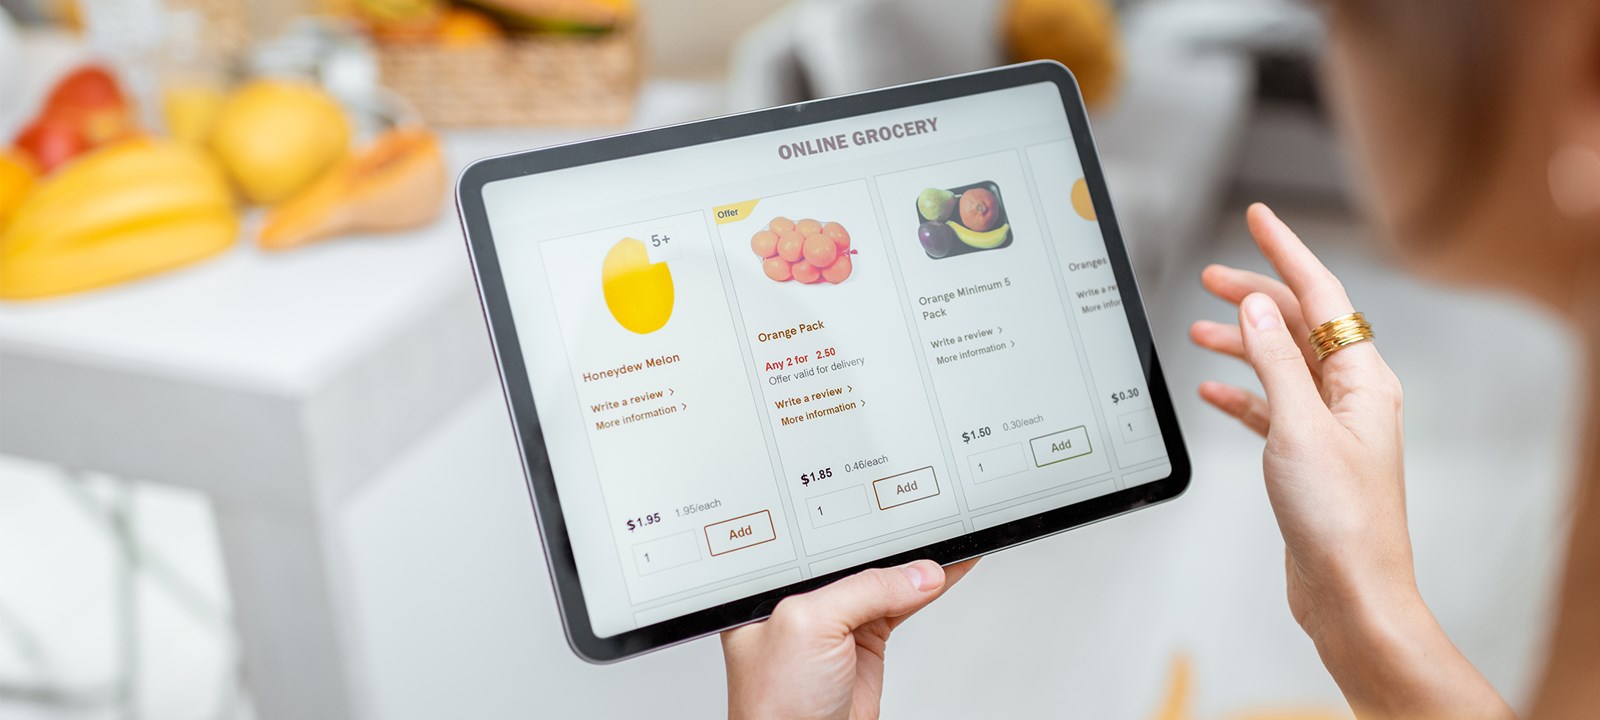 Universal Lessons From Online Grocery Shopping